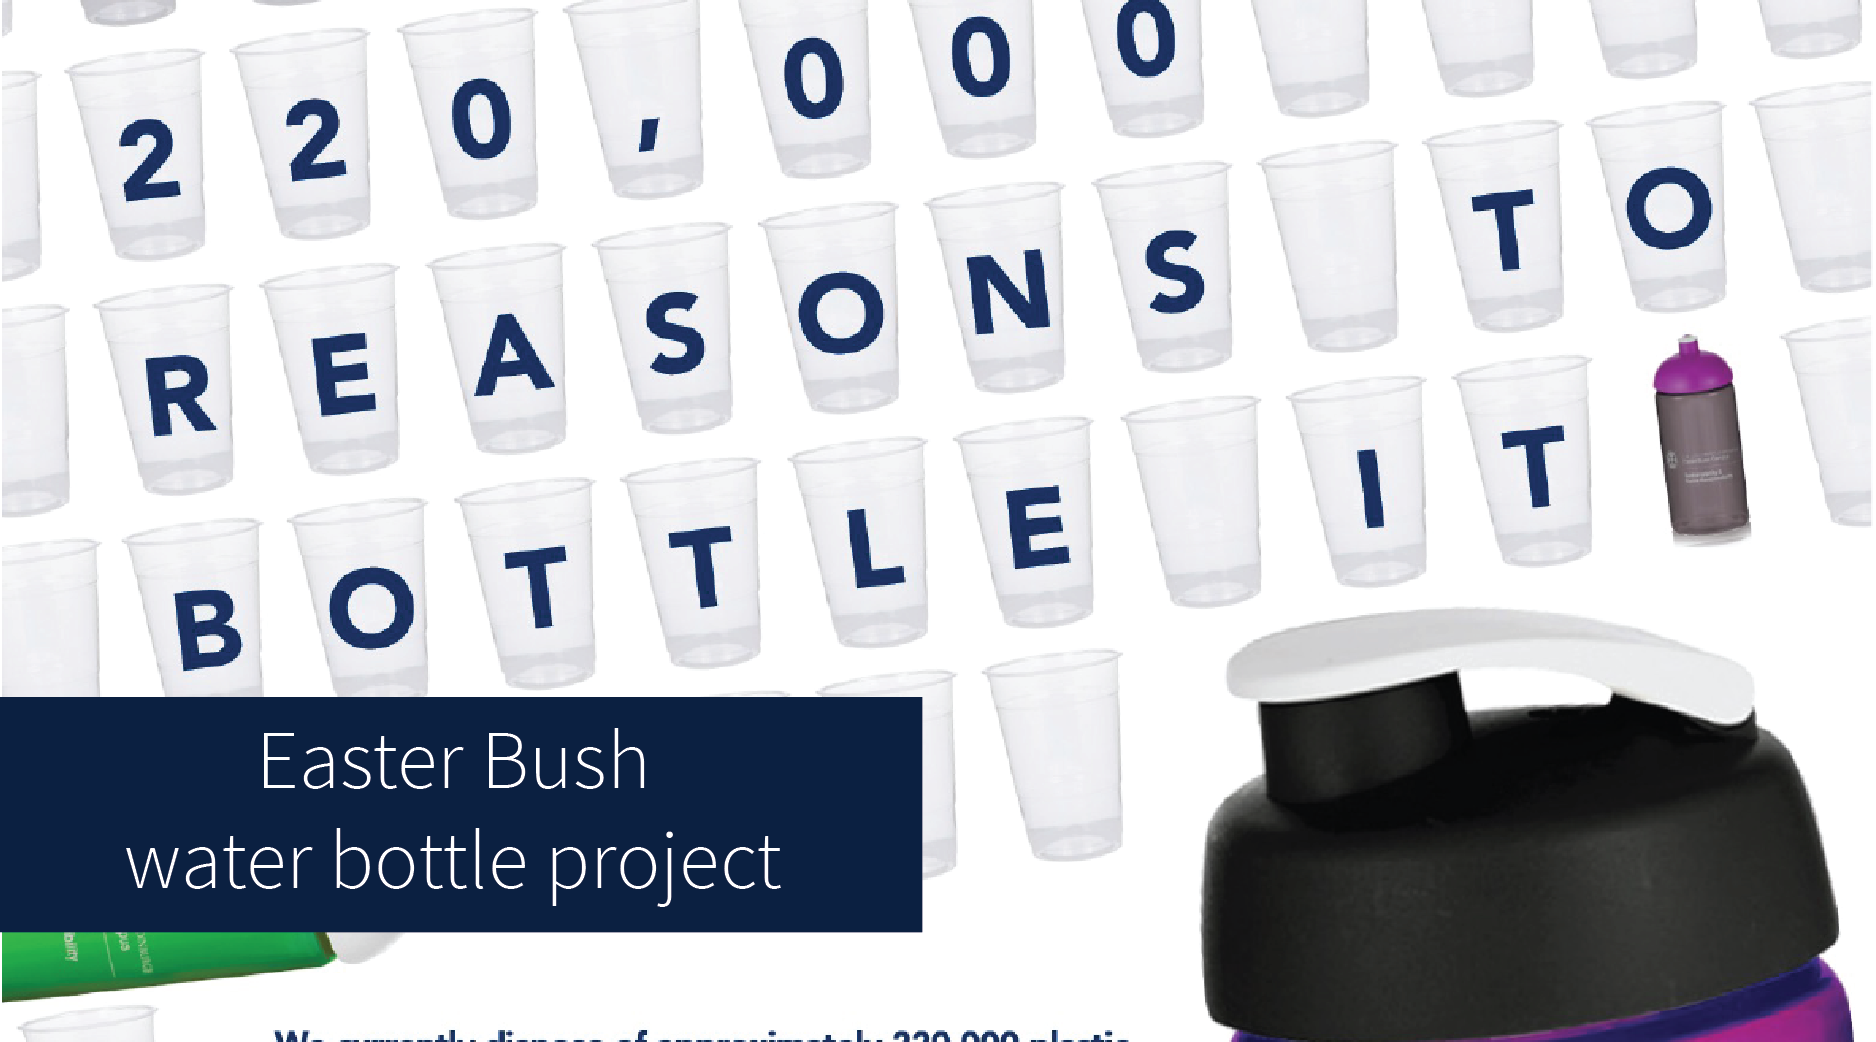 Bottle It Banner - Easter Bush water bottle sustainability project OCT 2016 - Brian McTeir